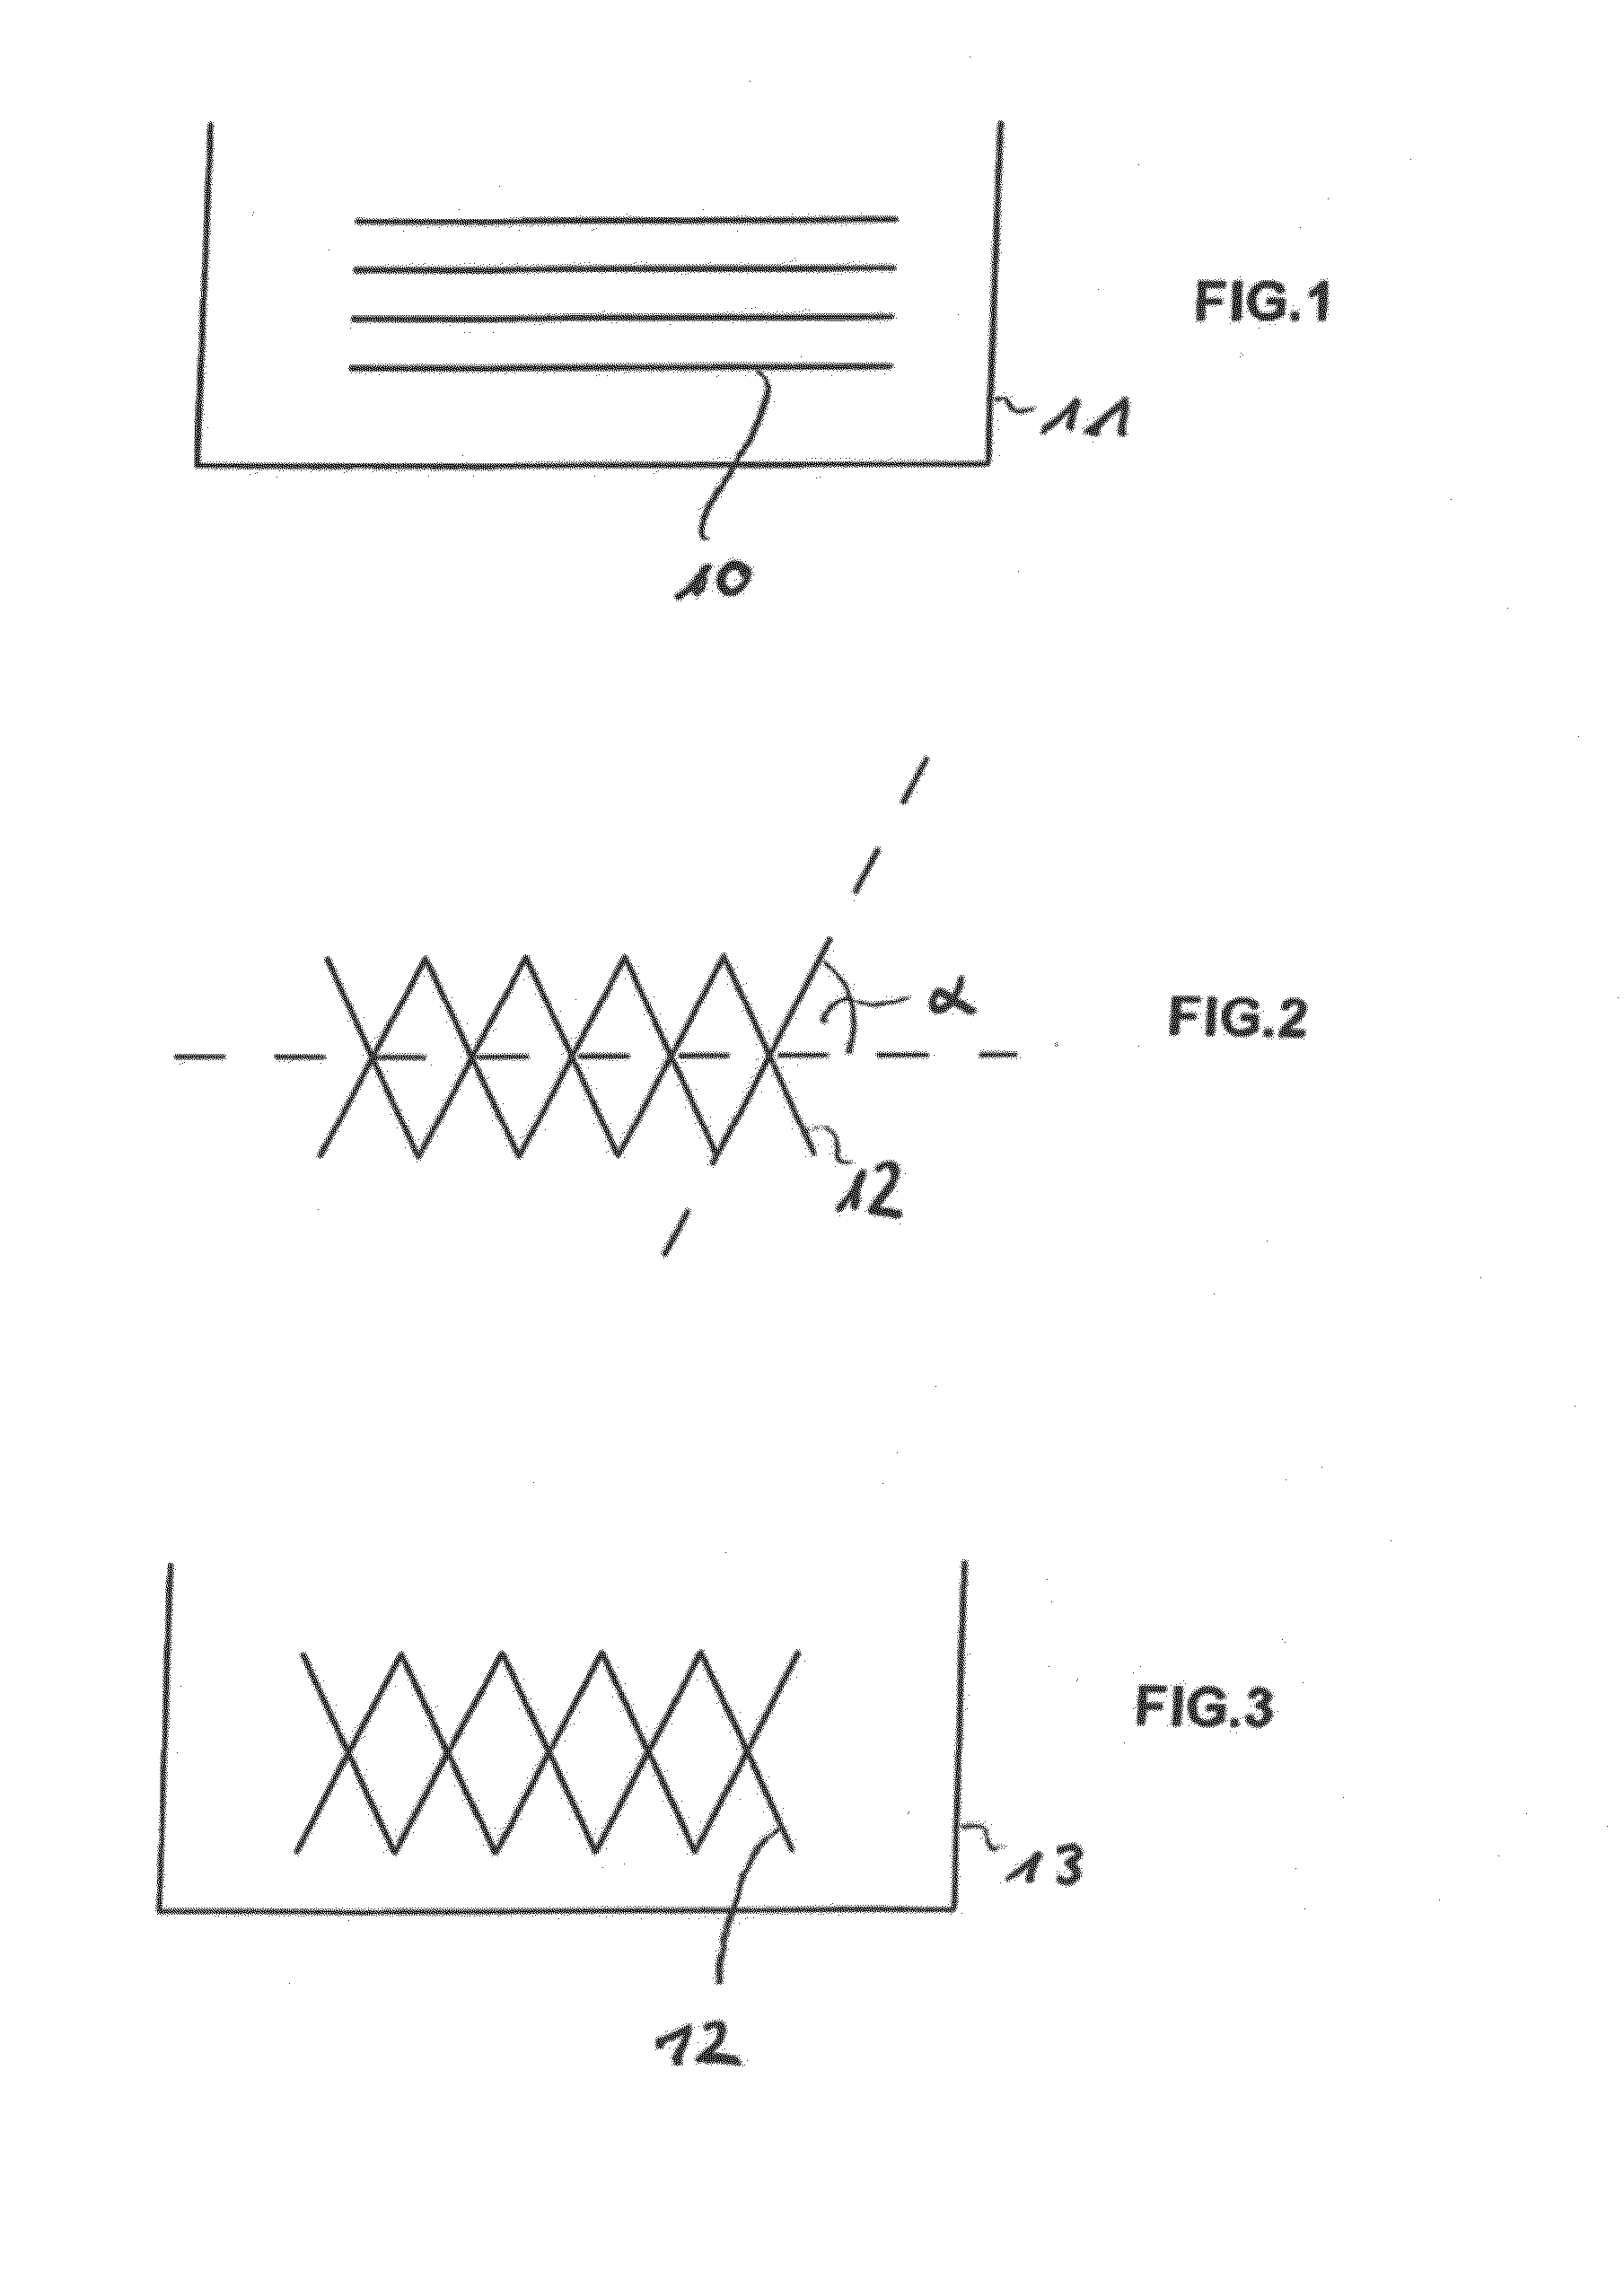 Intravascular Functional Element and Method of Manufacture and Use of a Salt Bath for Warming Treatment